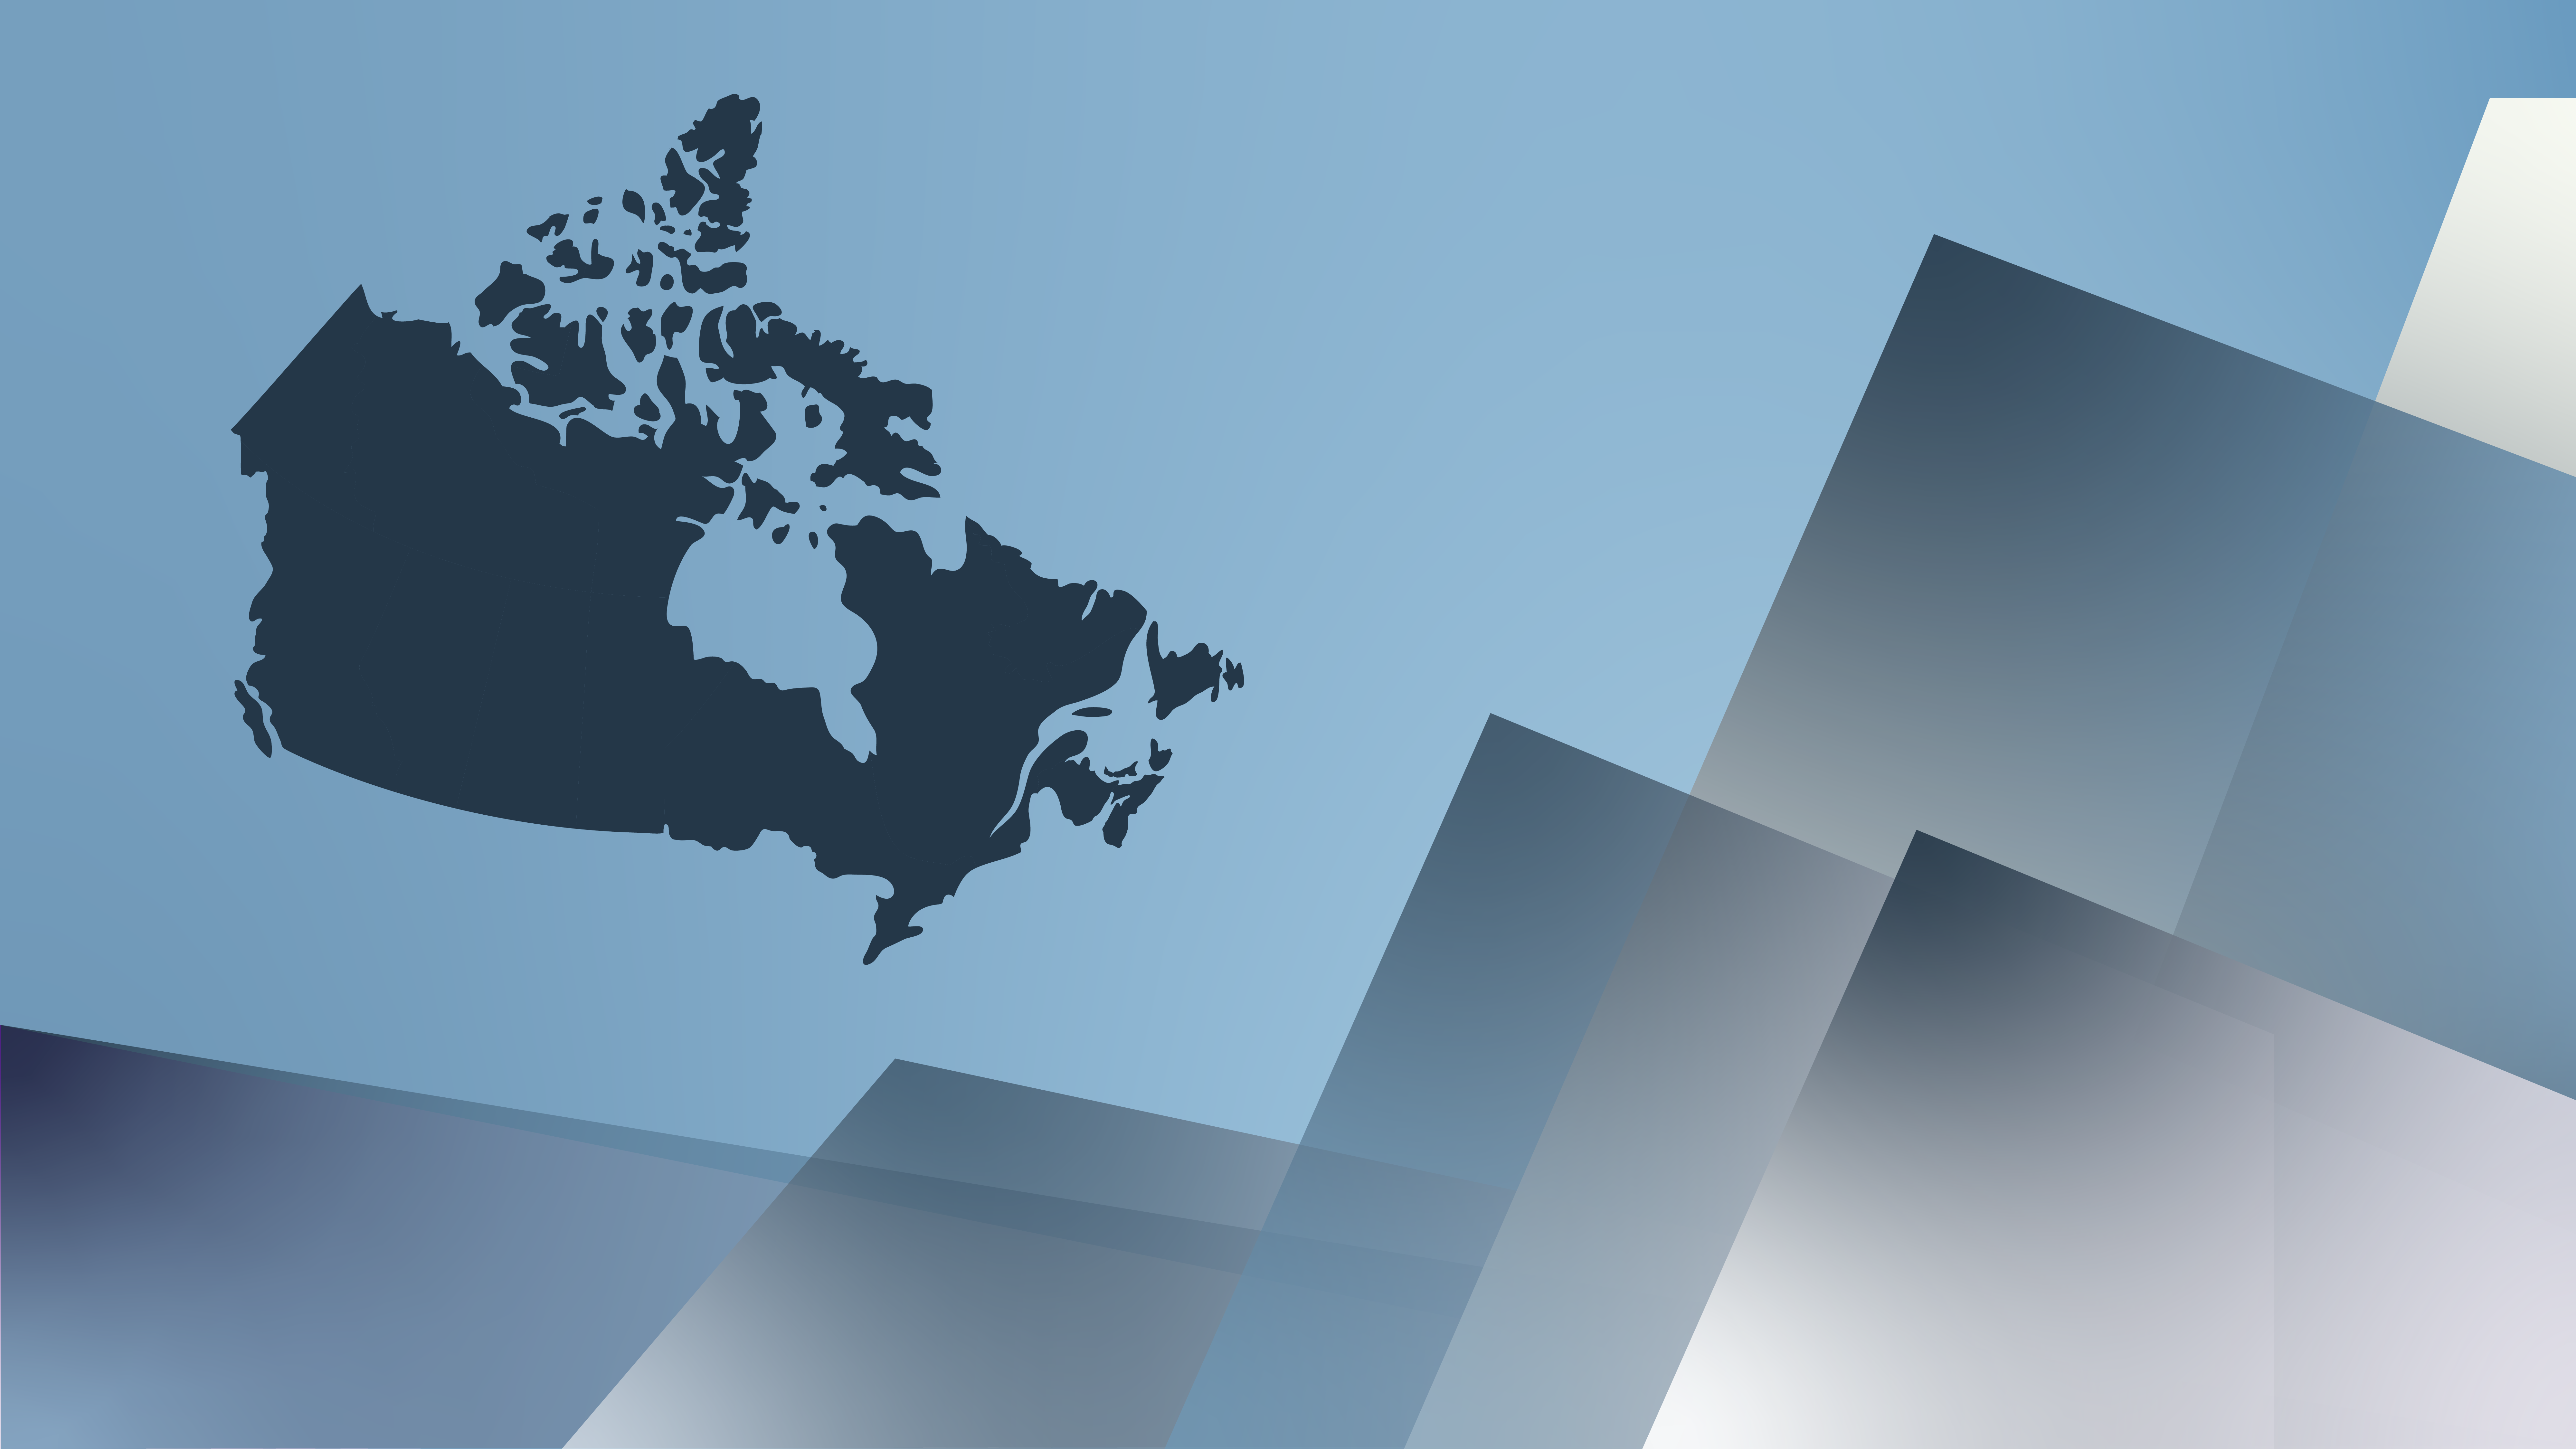 A banner illustration depicting the country of Canada on a blue background and with chevron design elements